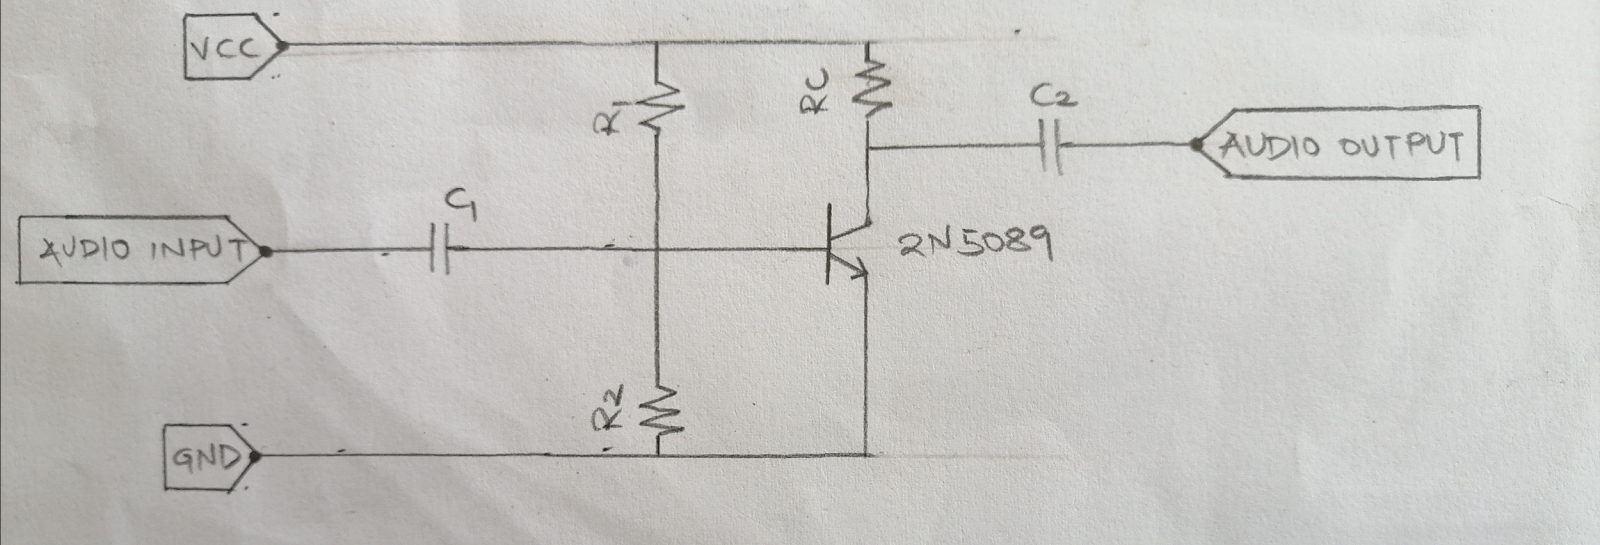 A 2N5089 transistor circuit when it works in an amplification application